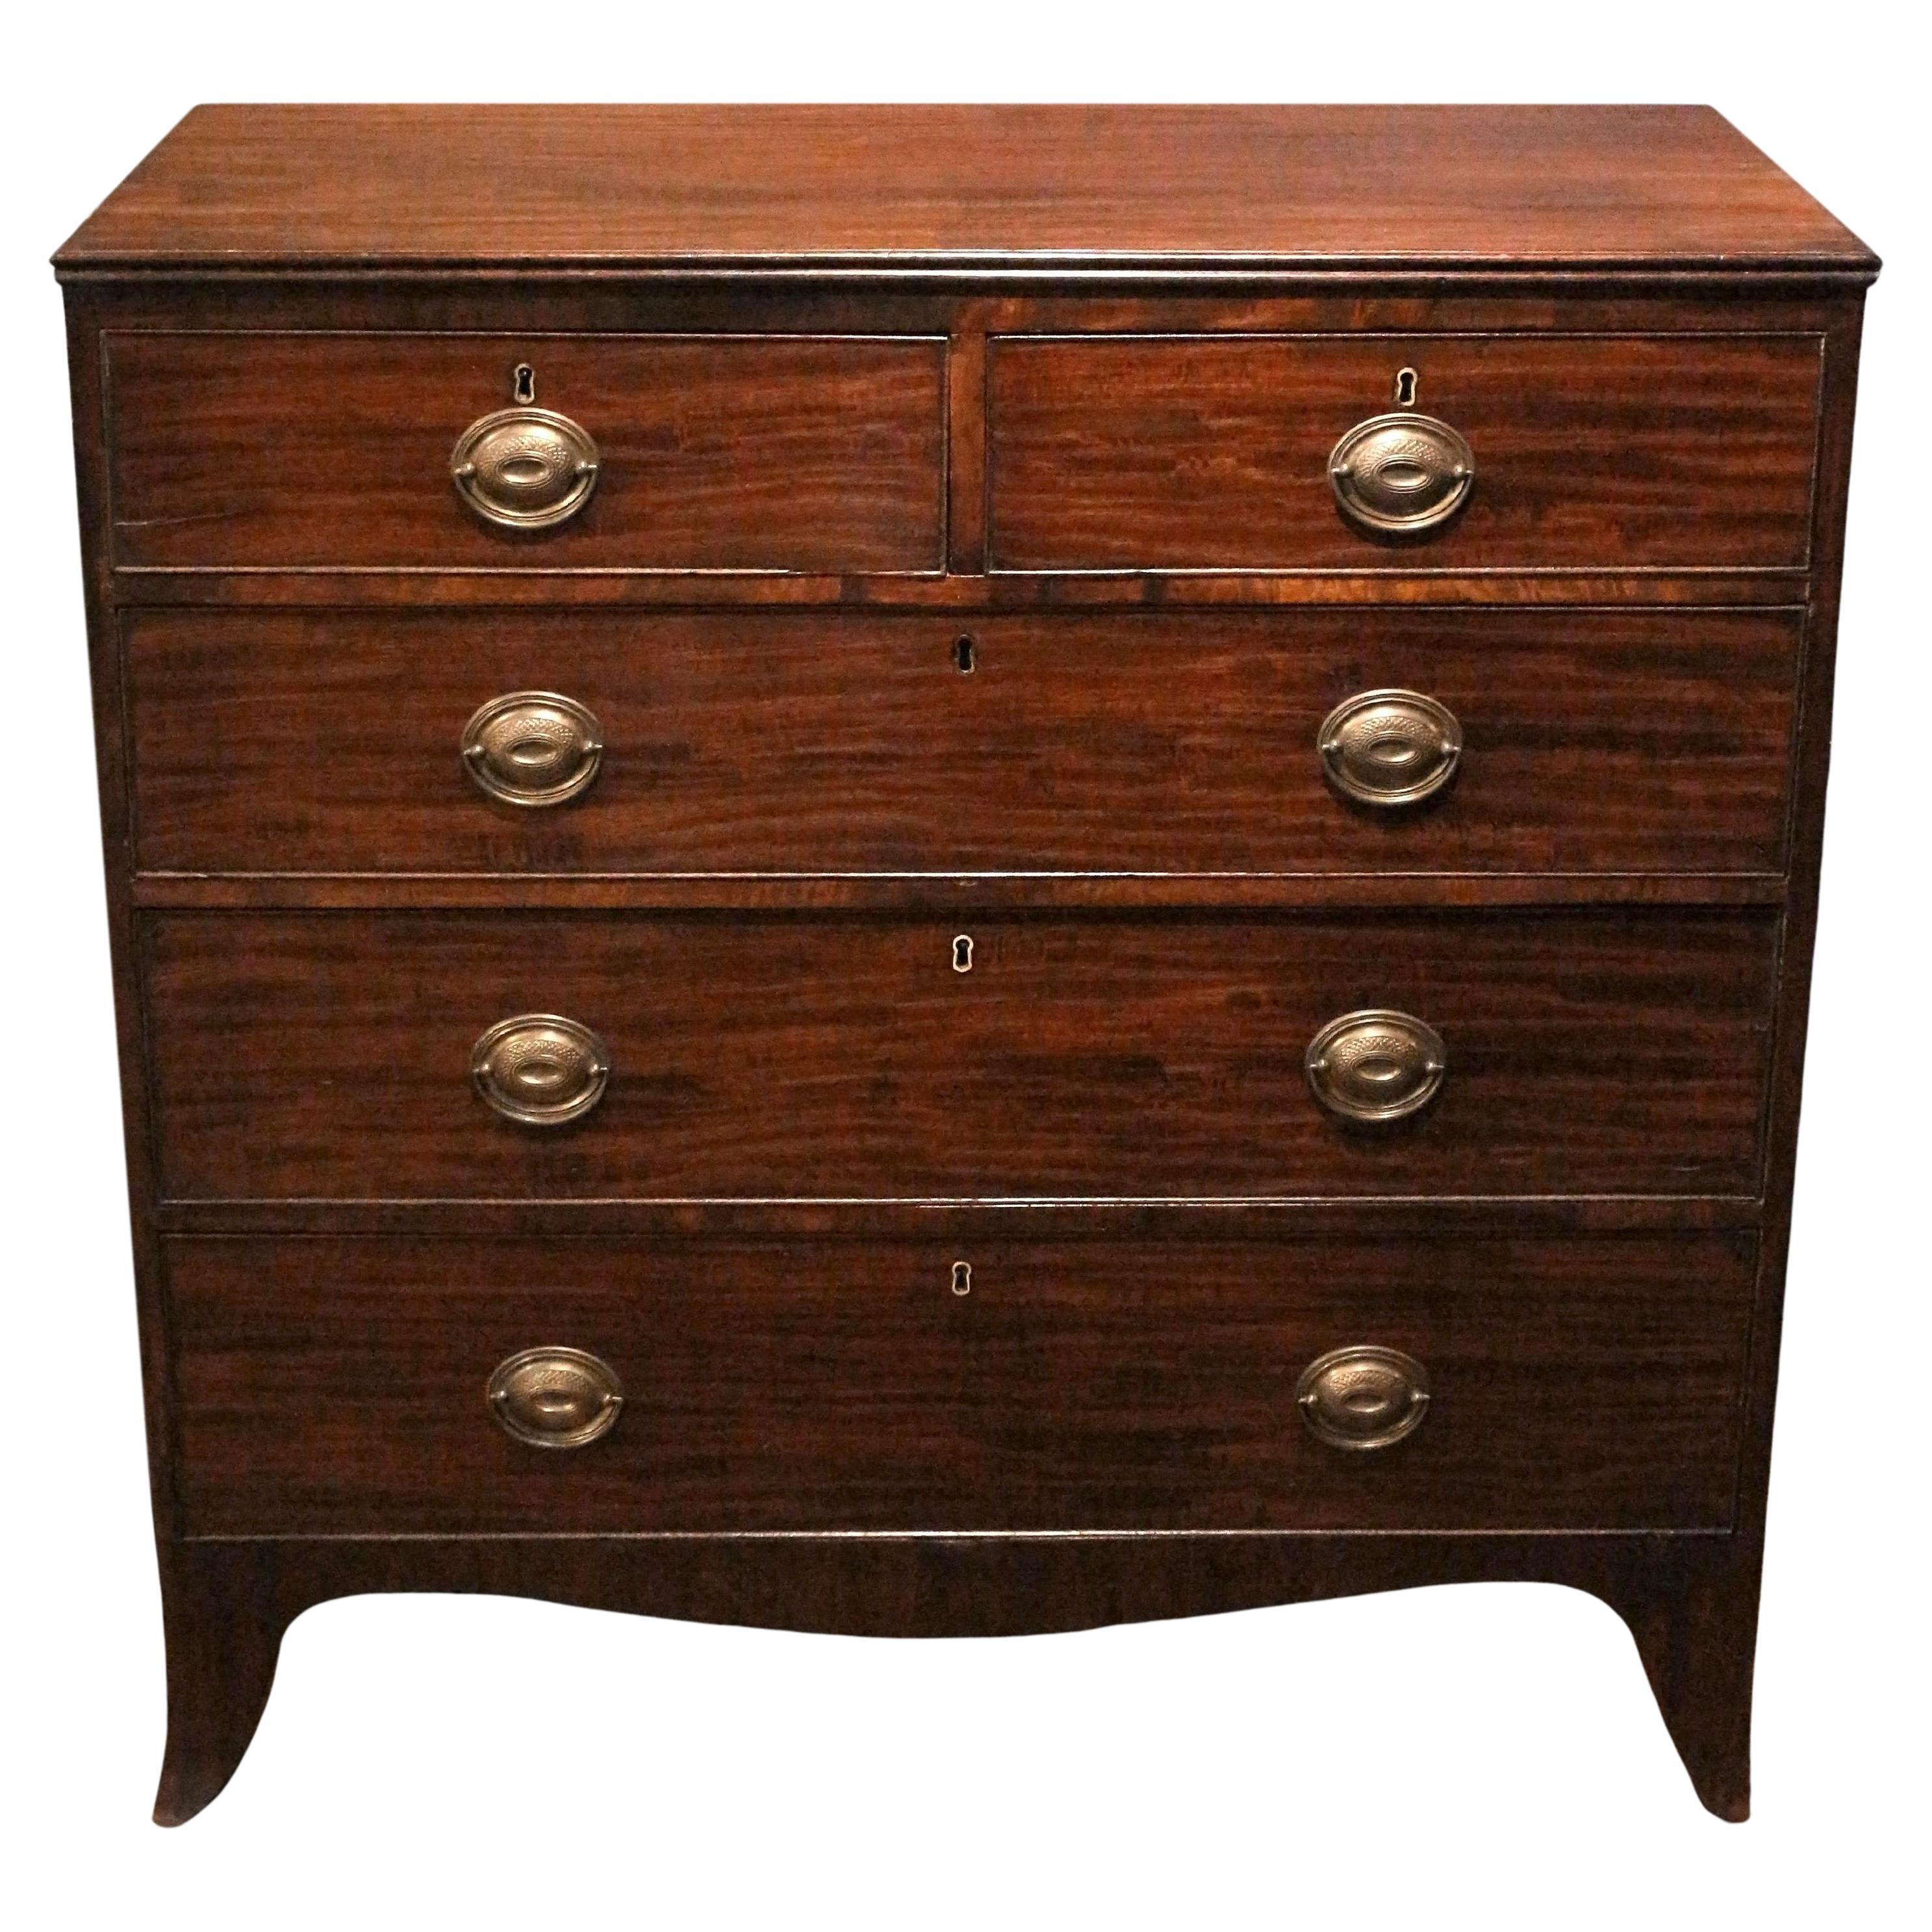 Circa 1800 English George III Period Chest of Drawers For Sale